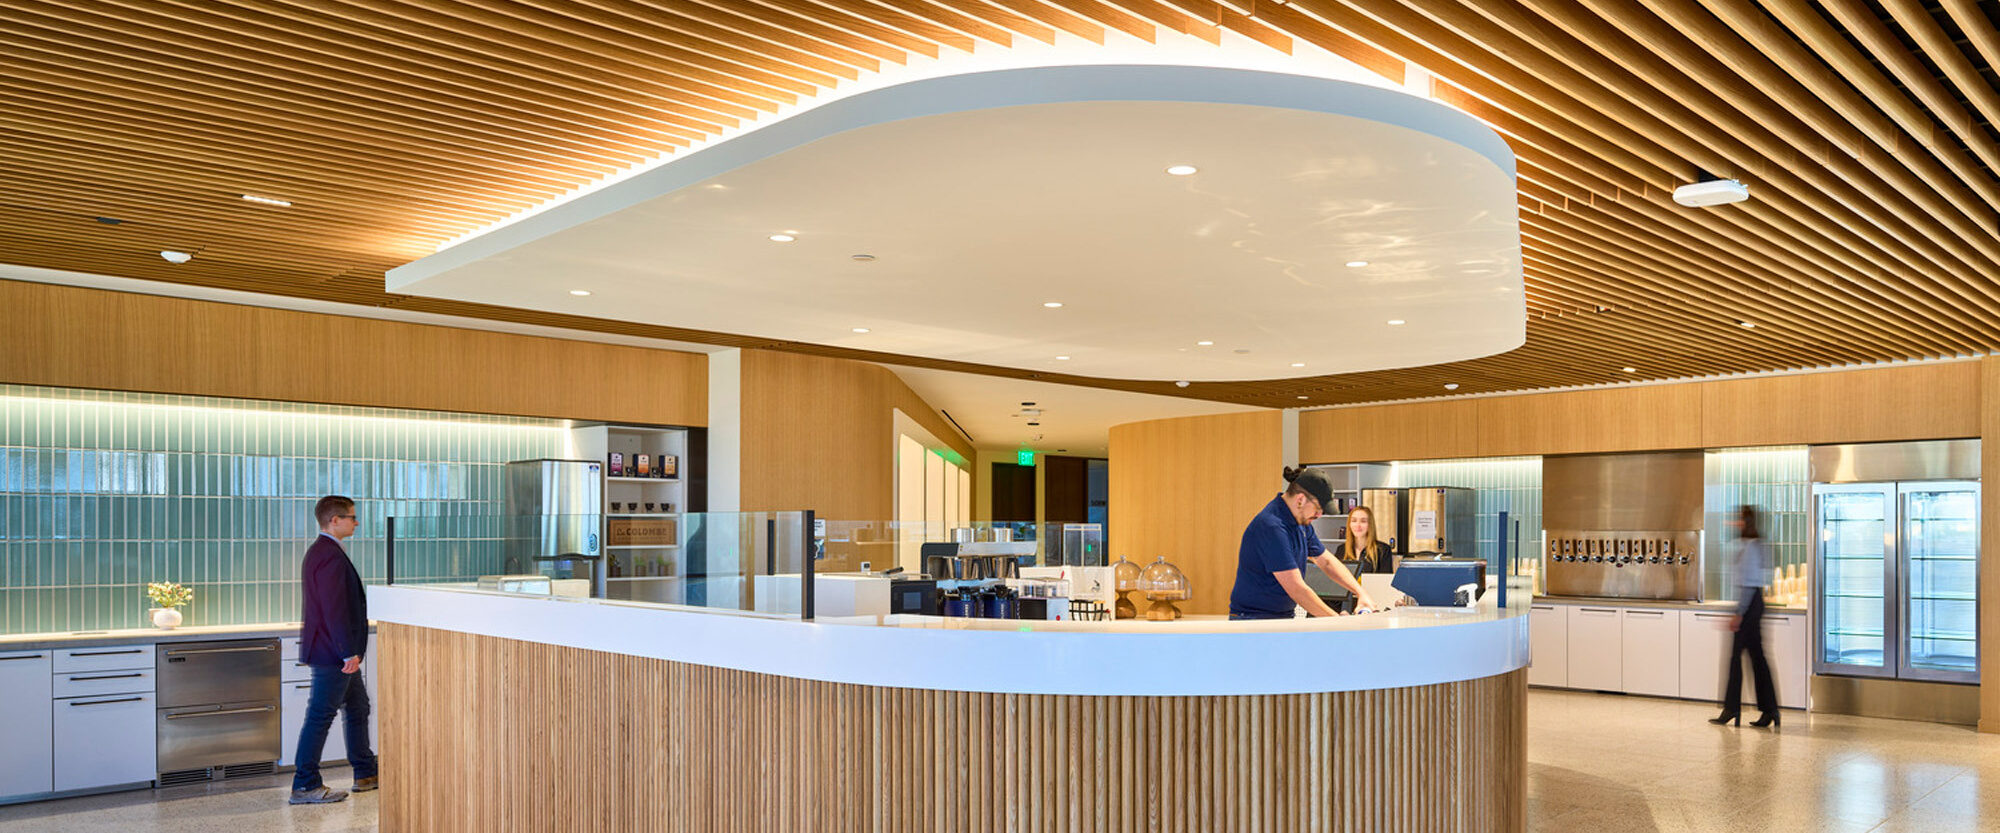 Modern interior showcasing a curved reception desk with vertical wooden slats, complemented by an expansive wooden slatted ceiling that follows the desk's curvature. Neutral tones and ambient lighting enhance the open, airy atmosphere, while individuals interact, suggesting a communal corporate environment.